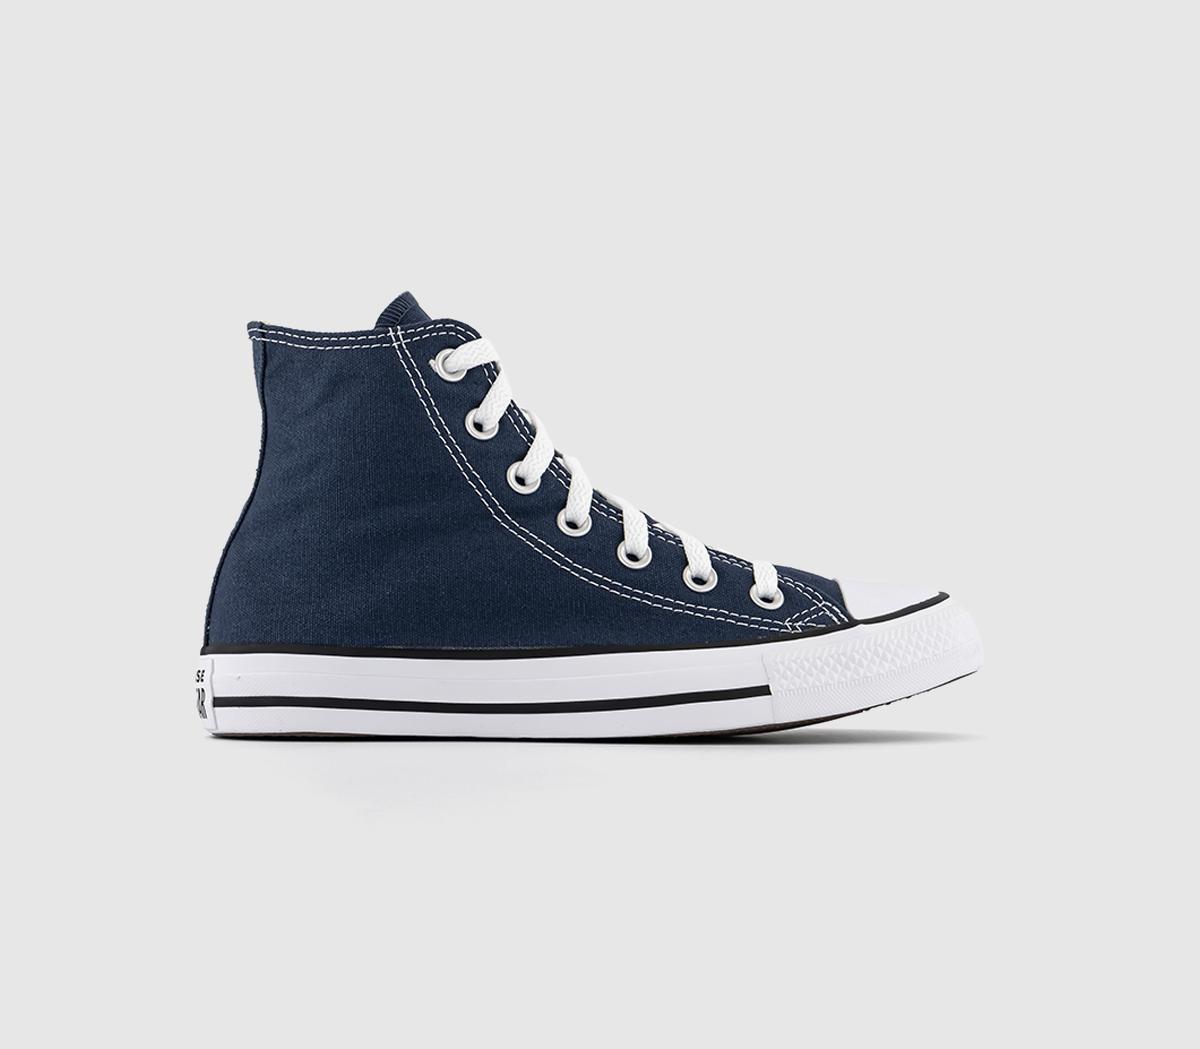 Converse All Star Hi Navy Canvas Trainers Blue/White